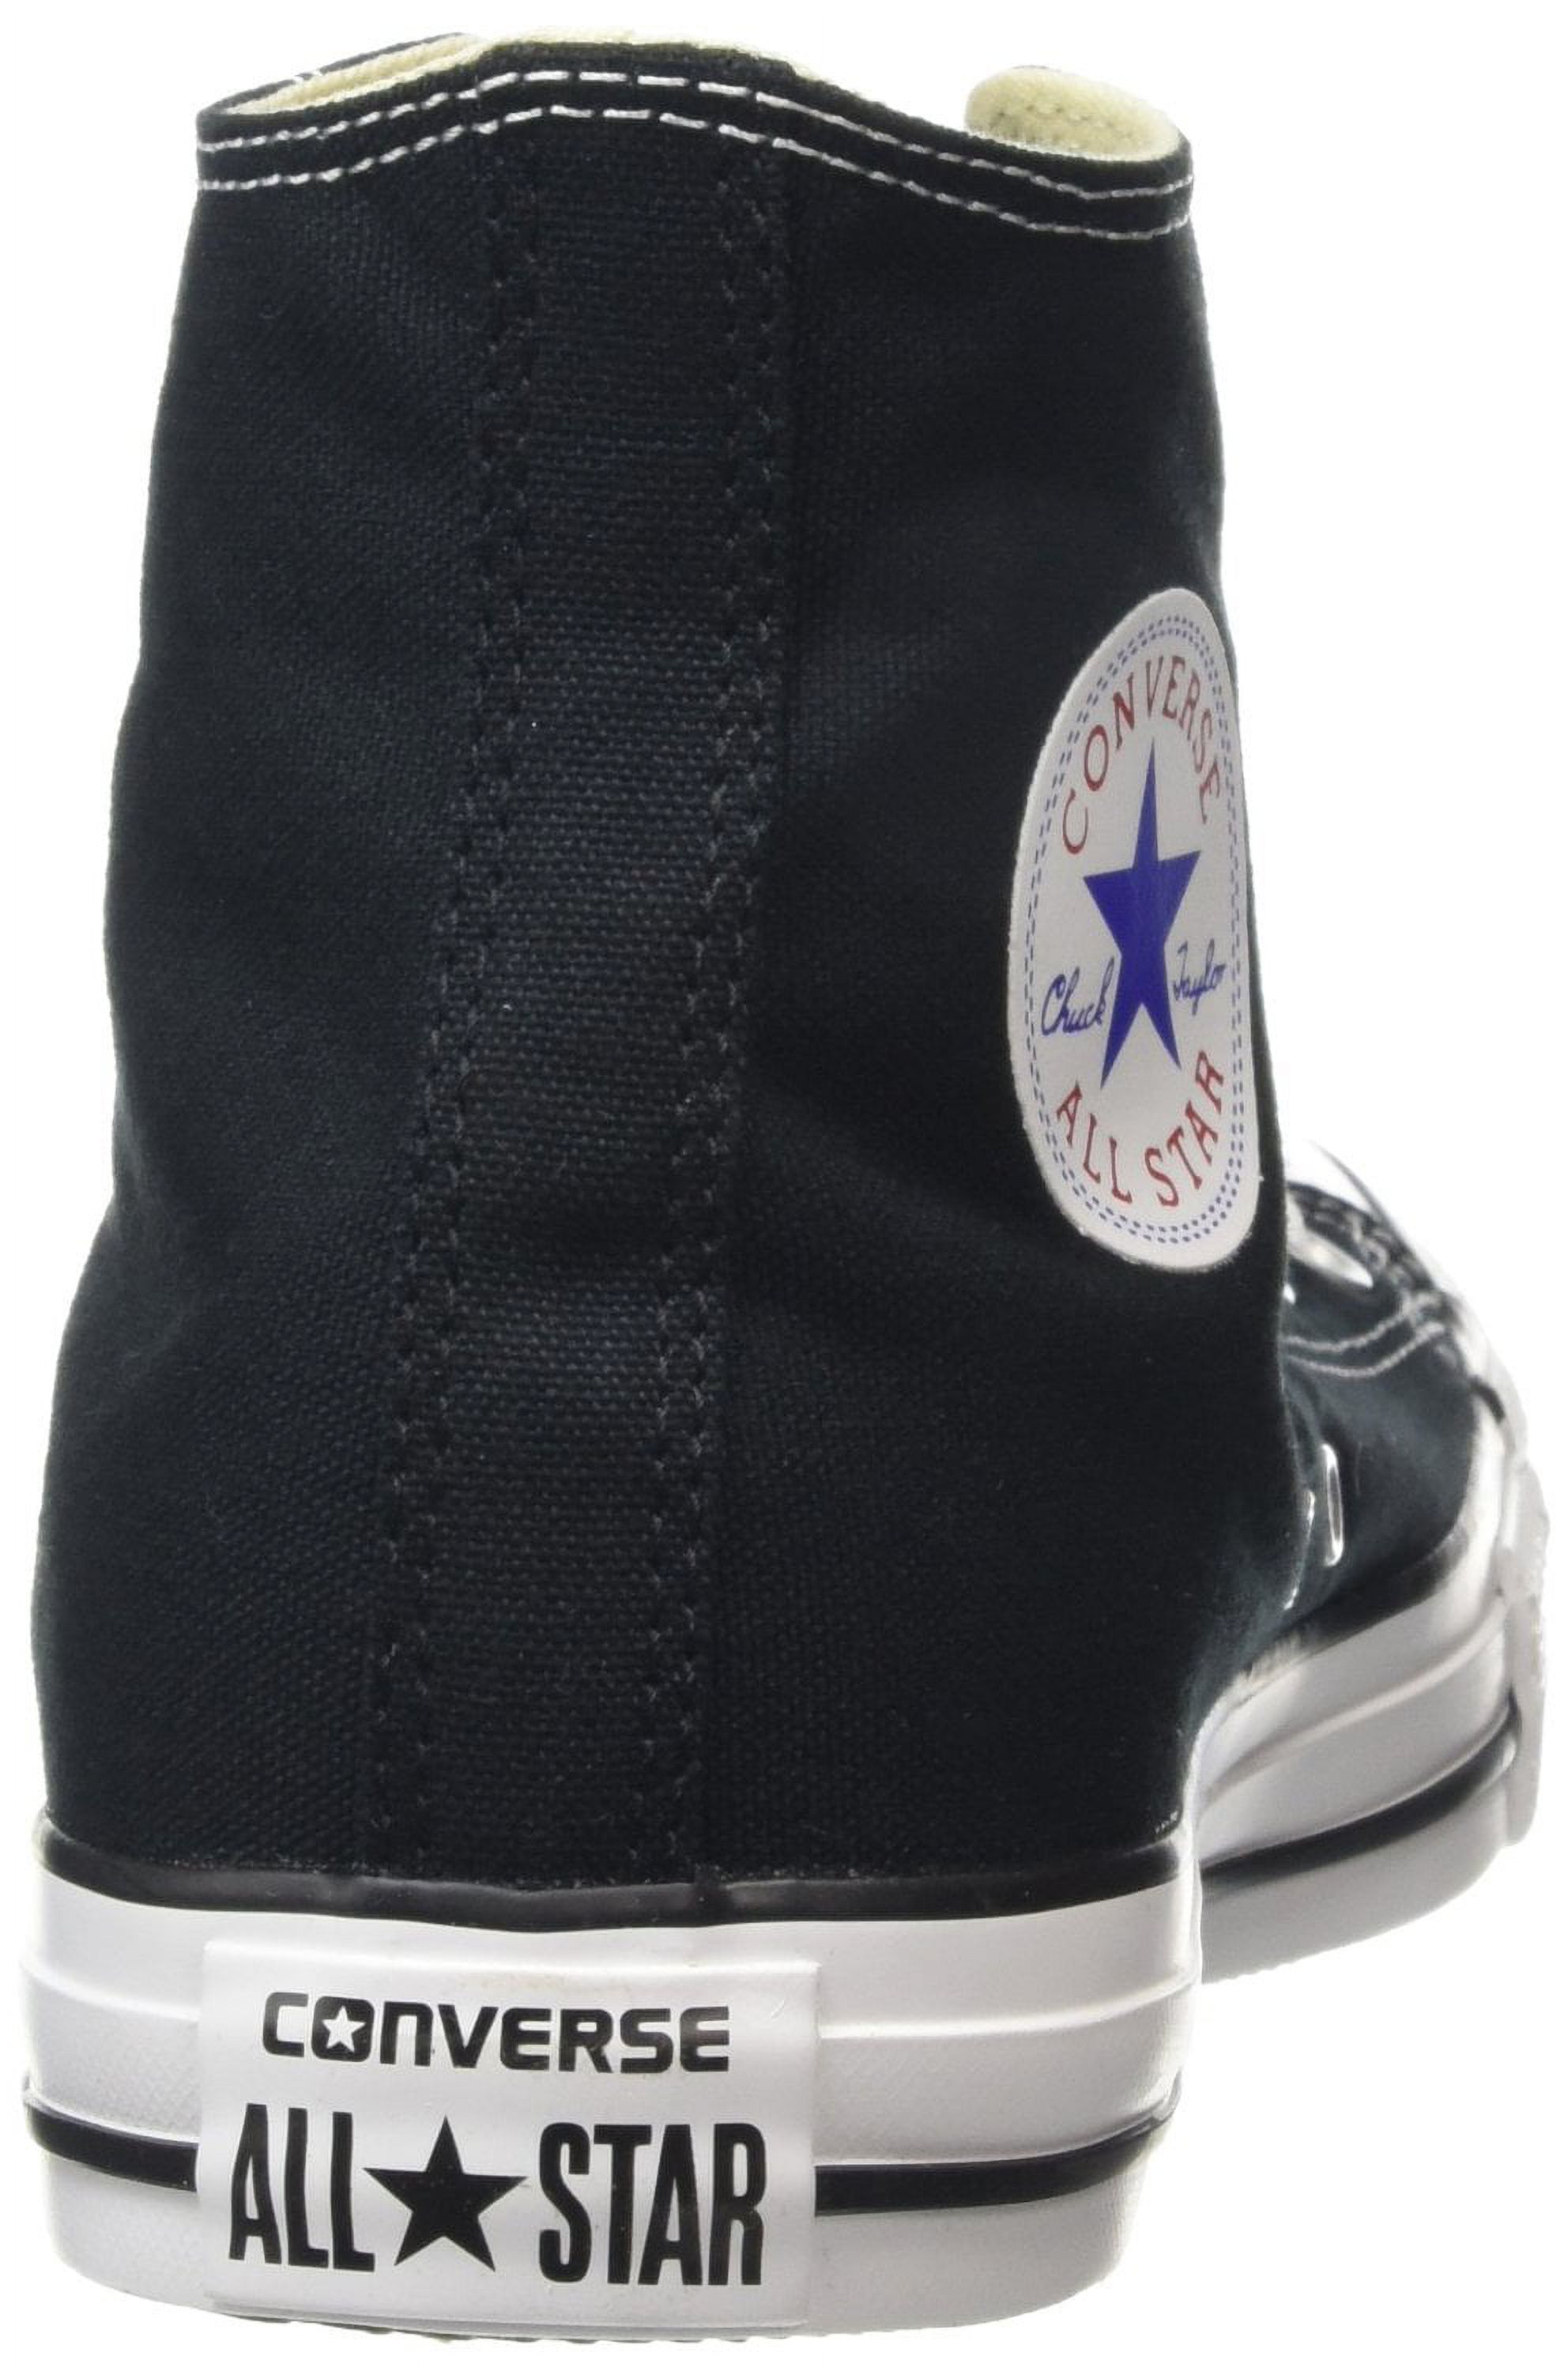 Converse Unisex Chuck Taylor All Star High Top - image 2 of 3